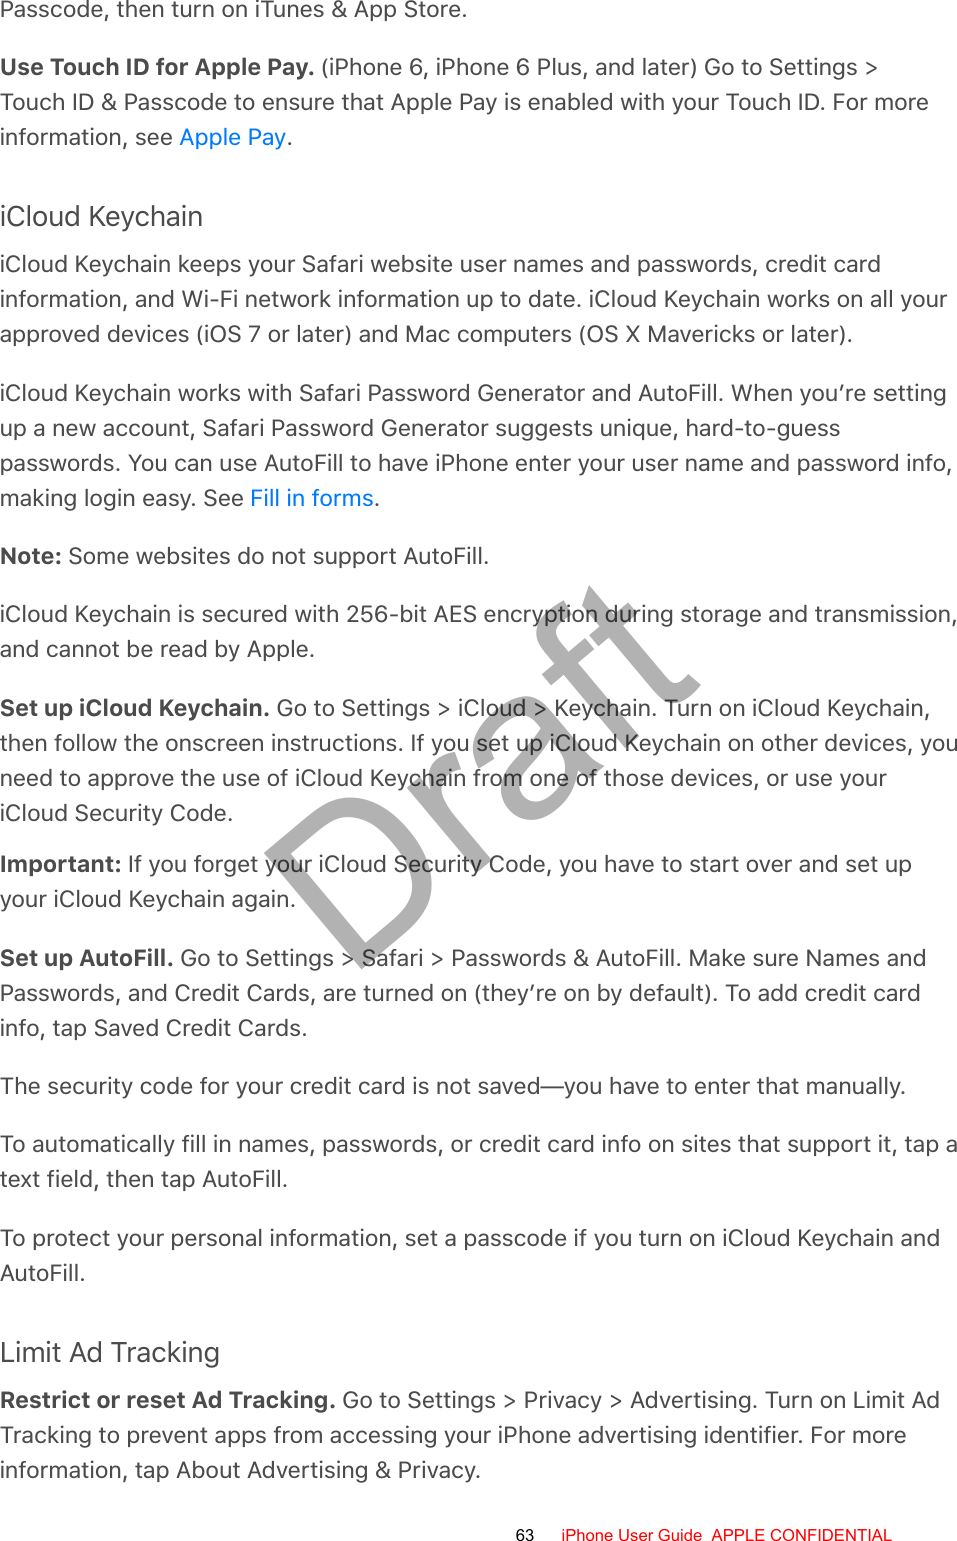 Passcode, then turn on iTunes &amp; App Store.Use Touch ID for Apple Pay. (iPhone 6, iPhone 6 Plus, and later) Go to Settings &gt;Touch ID &amp; Passcode to ensure that Apple Pay is enabled with your Touch ID. For moreinformation, see  .iCloud KeychainiCloud Keychain keeps your Safari website user names and passwords, credit cardinformation, and Wi-Fi network information up to date. iCloud Keychain works on all yourapproved devices (iOS 7 or later) and Mac computers (OS X Mavericks or later).iCloud Keychain works with Safari Password Generator and AutoFill. When you’re settingup a new account, Safari Password Generator suggests unique, hard-to-guesspasswords. You can use AutoFill to have iPhone enter your user name and password info,making login easy. See  .Note: Some websites do not support AutoFill.iCloud Keychain is secured with 256-bit AES encryption during storage and transmission,and cannot be read by Apple.Set up iCloud Keychain. Go to Settings &gt; iCloud &gt; Keychain. Turn on iCloud Keychain,then follow the onscreen instructions. If you set up iCloud Keychain on other devices, youneed to approve the use of iCloud Keychain from one of those devices, or use youriCloud Security Code.Important: If you forget your iCloud Security Code, you have to start over and set upyour iCloud Keychain again.Set up AutoFill. Go to Settings &gt; Safari &gt; Passwords &amp; AutoFill. Make sure Names andPasswords, and Credit Cards, are turned on (they’re on by default). To add credit cardinfo, tap Saved Credit Cards.The security code for your credit card is not saved—you have to enter that manually.To automatically fill in names, passwords, or credit card info on sites that support it, tap atext field, then tap AutoFill.To protect your personal information, set a passcode if you turn on iCloud Keychain andAutoFill.Limit Ad TrackingRestrict or reset Ad Tracking. Go to Settings &gt; Privacy &gt; Advertising. Turn on Limit AdTracking to prevent apps from accessing your iPhone advertising identifier. For moreinformation, tap About Advertising &amp; Privacy.Apple PayFill in forms63 iPhone User Guide  APPLE CONFIDENTIALDraft